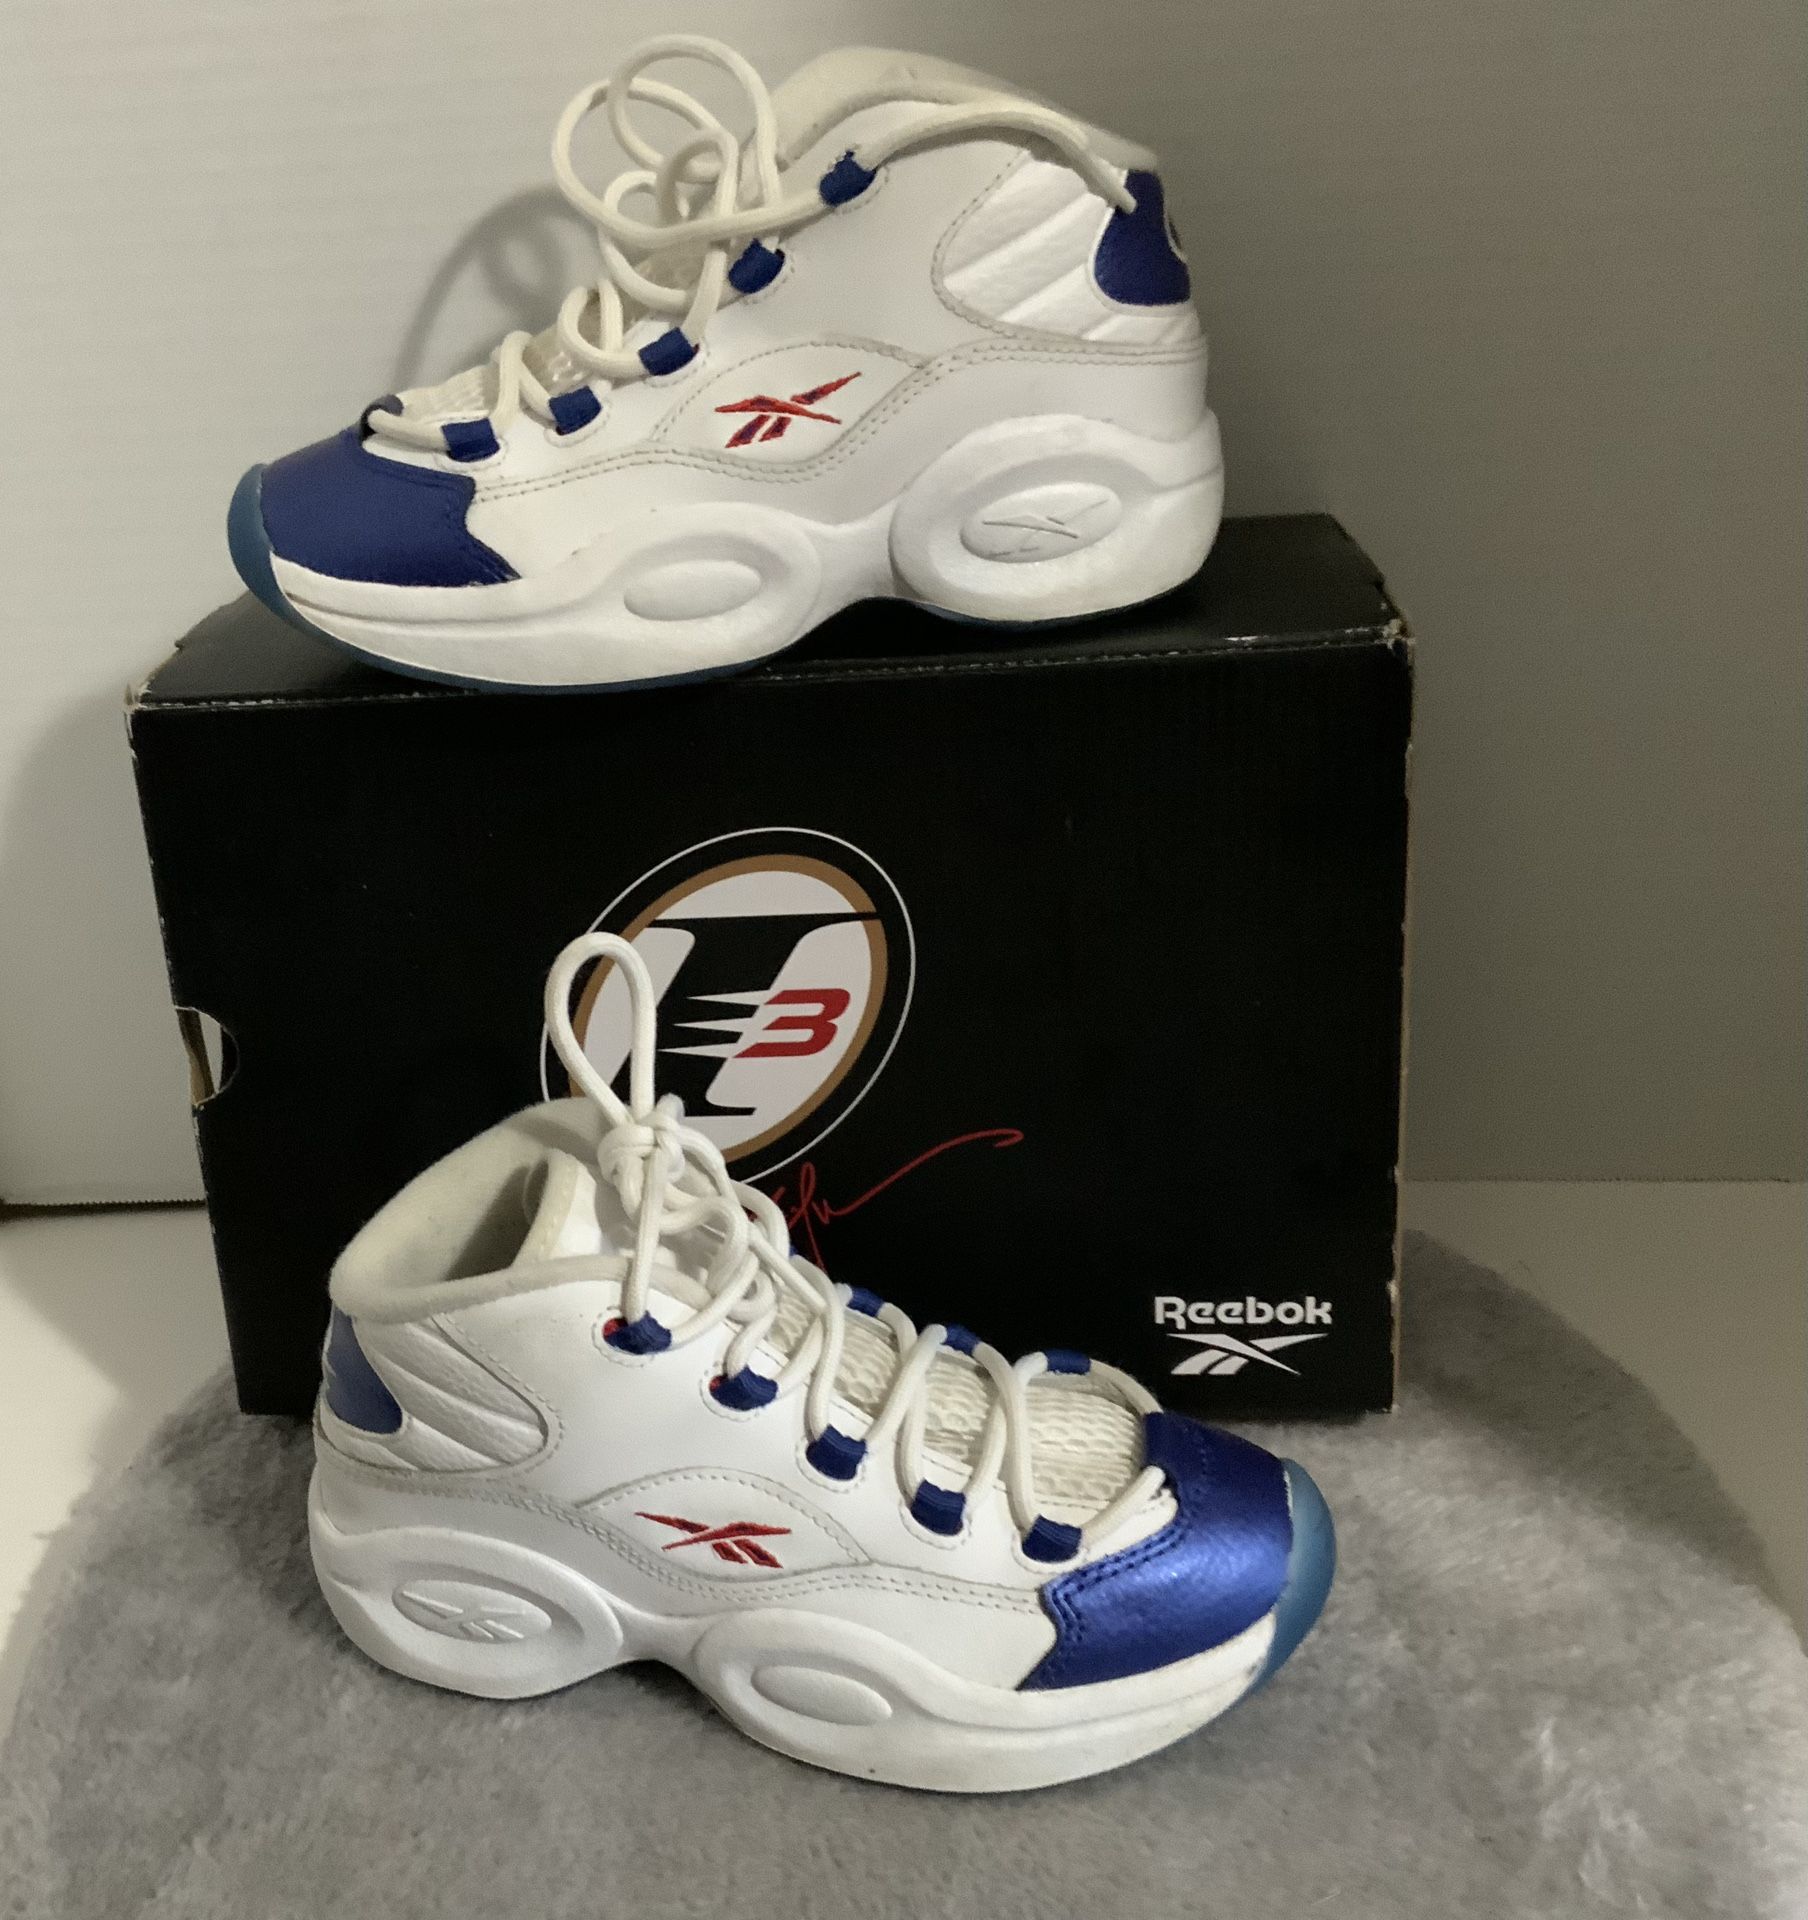 REEBOK QUESTION SIZE 1.5 Youth